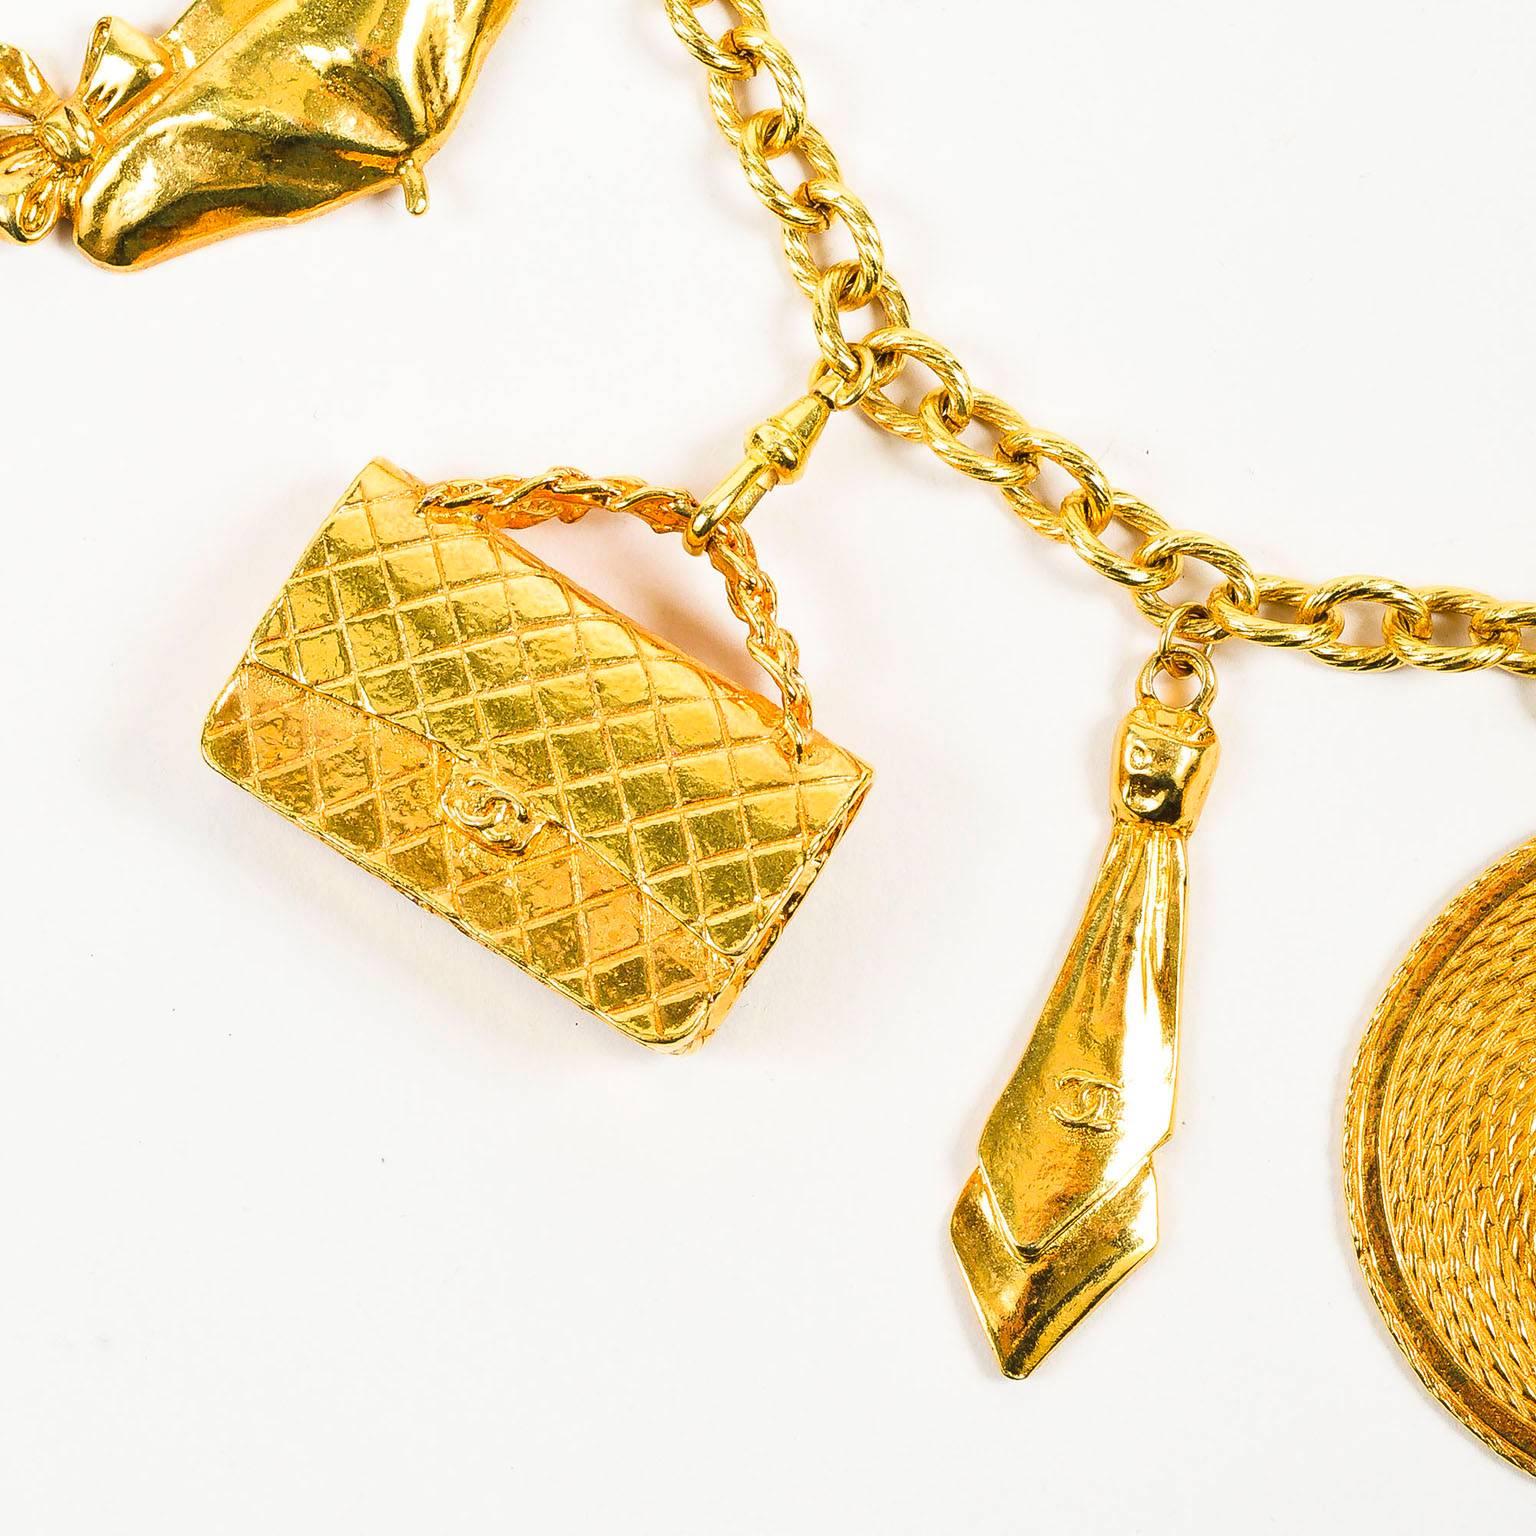 Highly collectible, vintage Chanel statement necklace. This over-the-top piece features iconic Chanel elements. Gold tone metal. Short, textured rolo chain. Dangling charms include a feminine bow, Mademoiselle Chanel, a woven sun hat, 'CC' logo